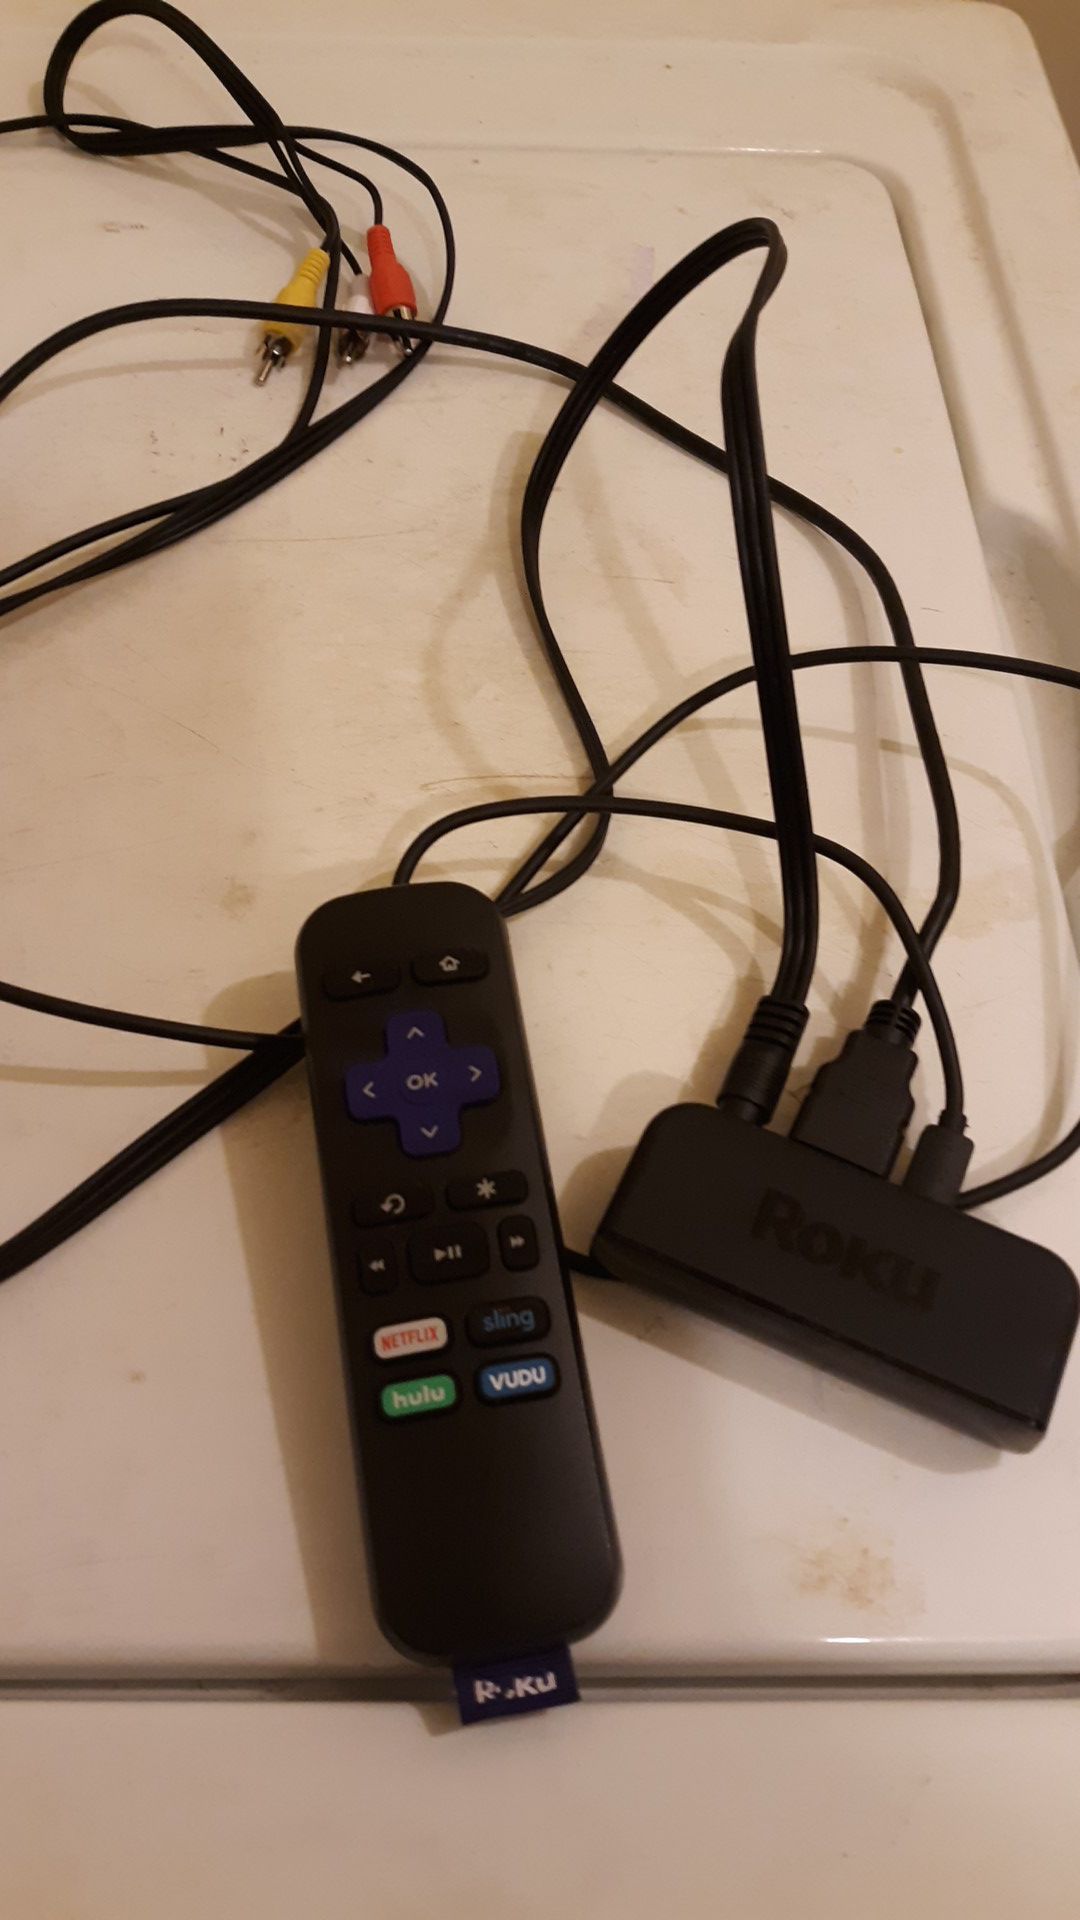 Roku stick with the remote brand new just brought a TV with built in roku